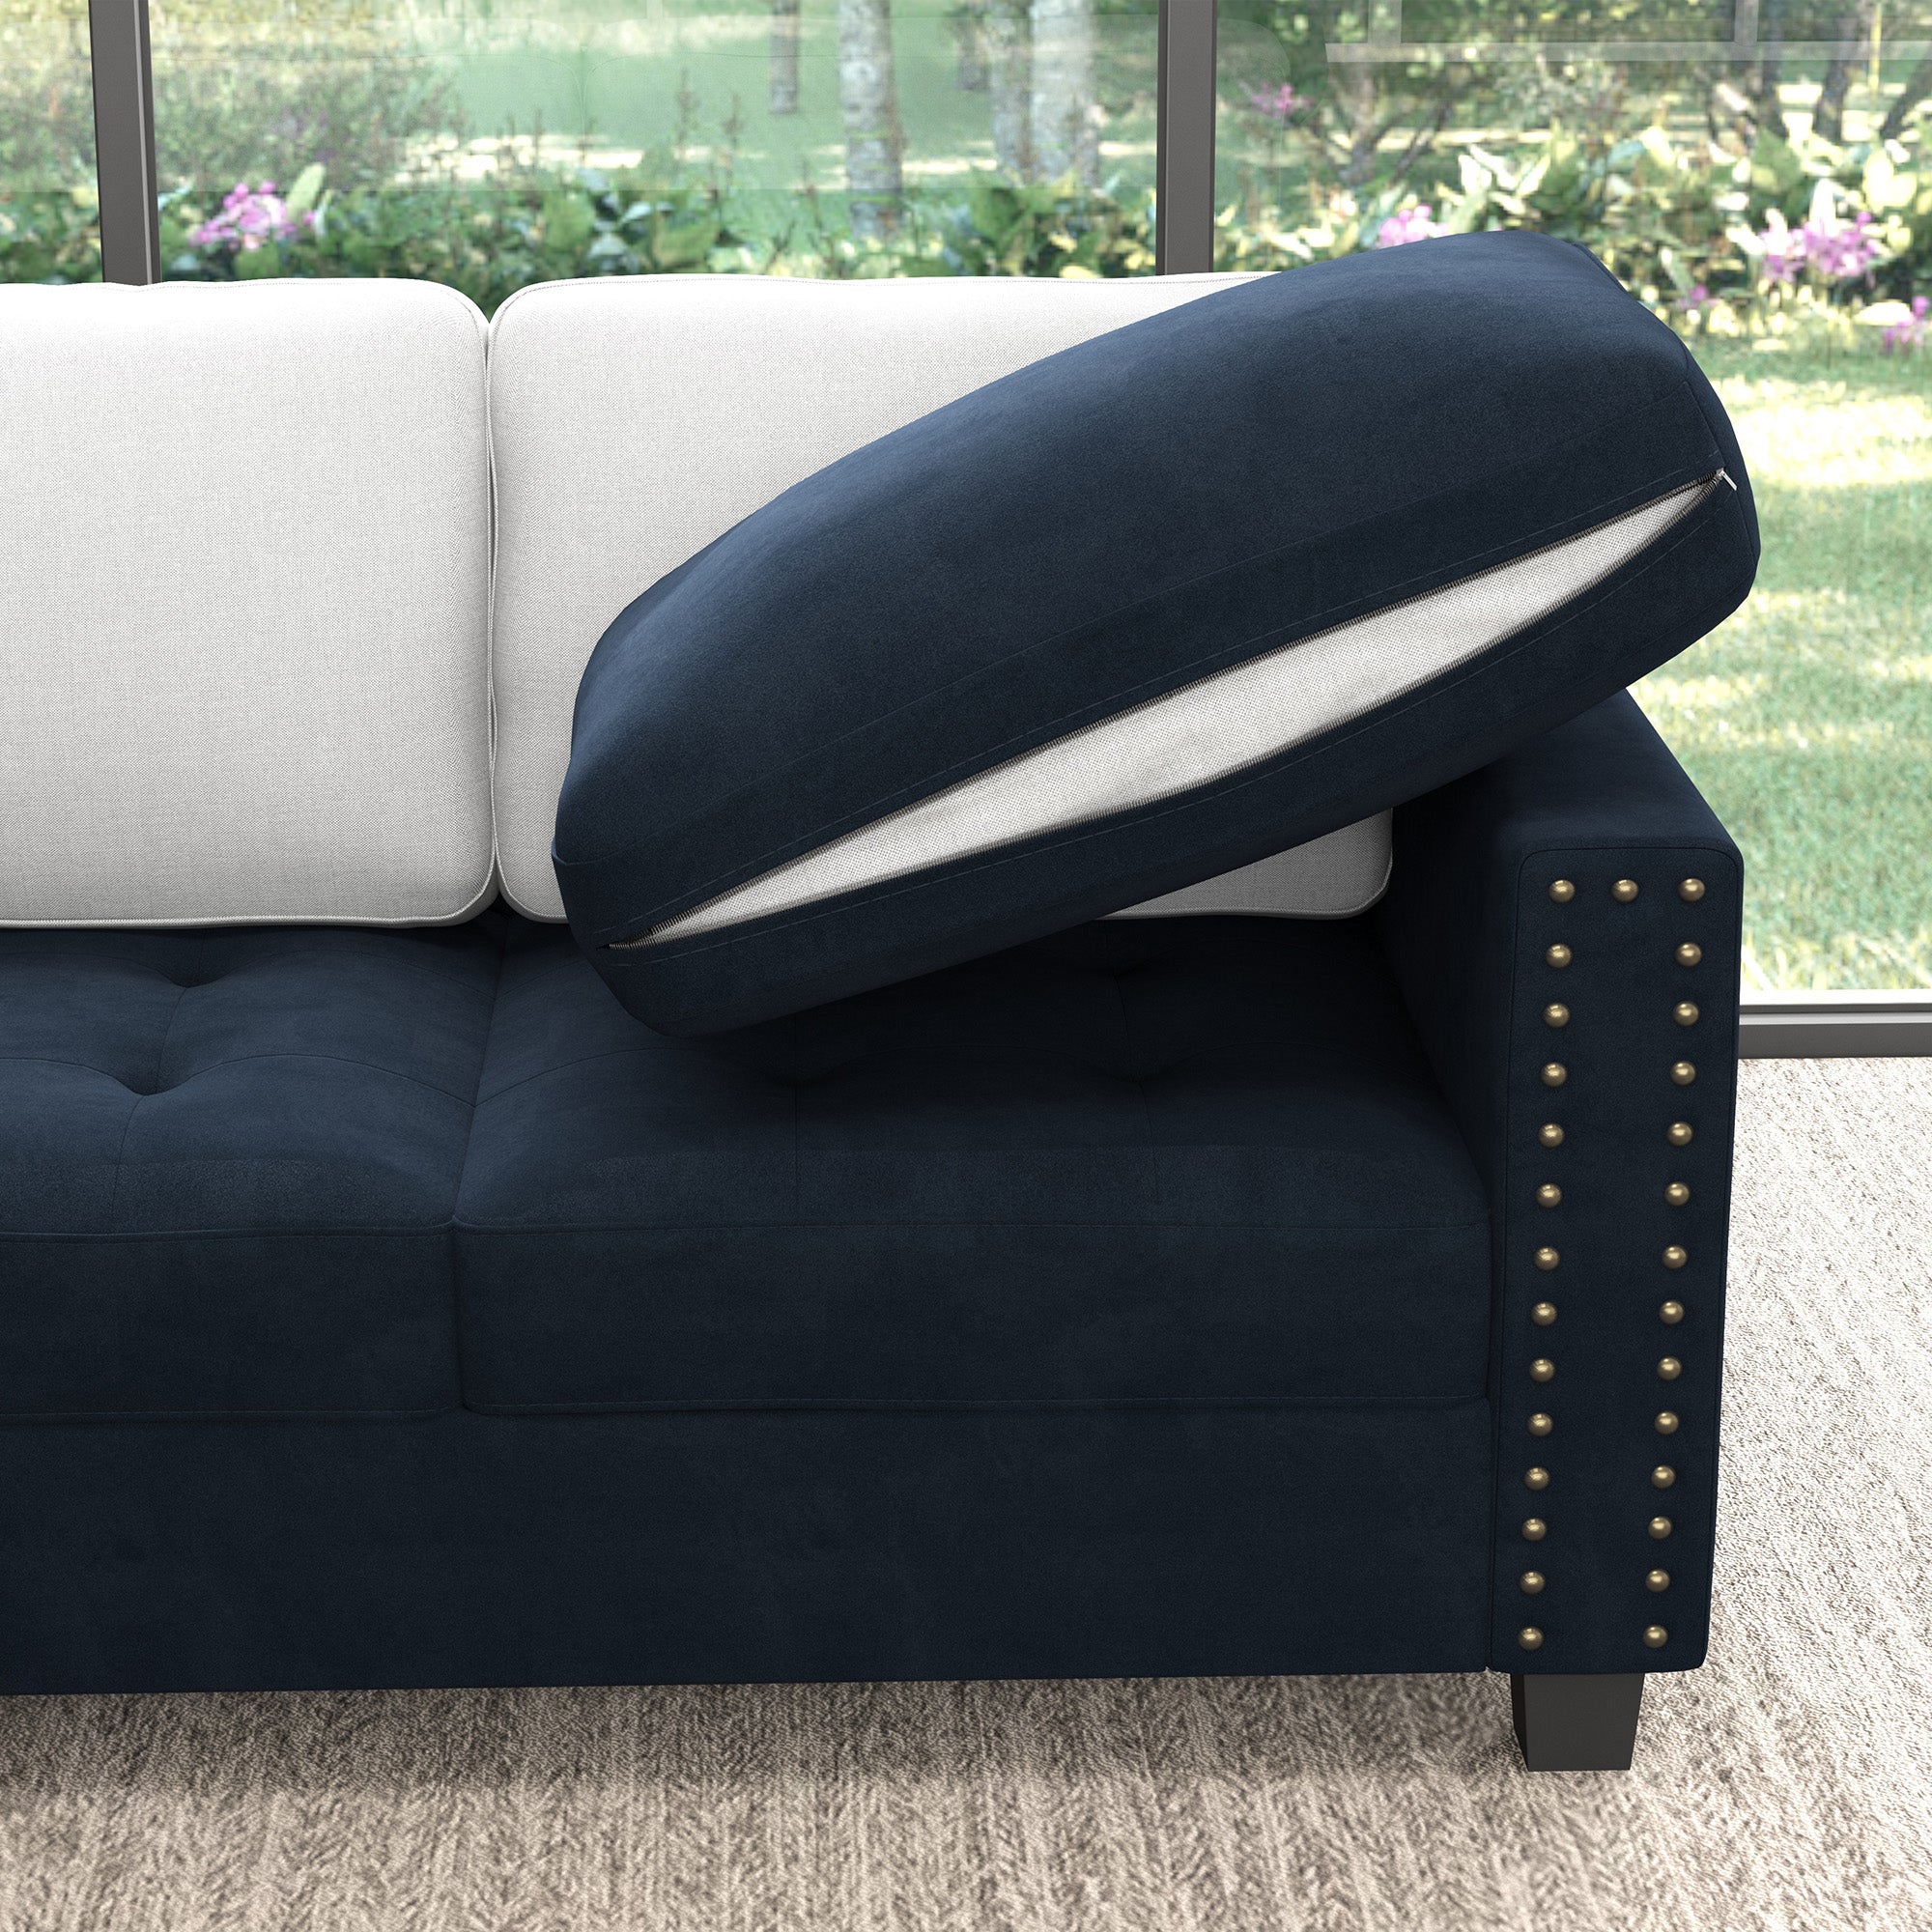 HONBAY Velvet Sectional Couch, U Shaped Sectional Sofa with Chaise Modular Sectional with Storage Ottoman for Living Room #Color_Dark Blue